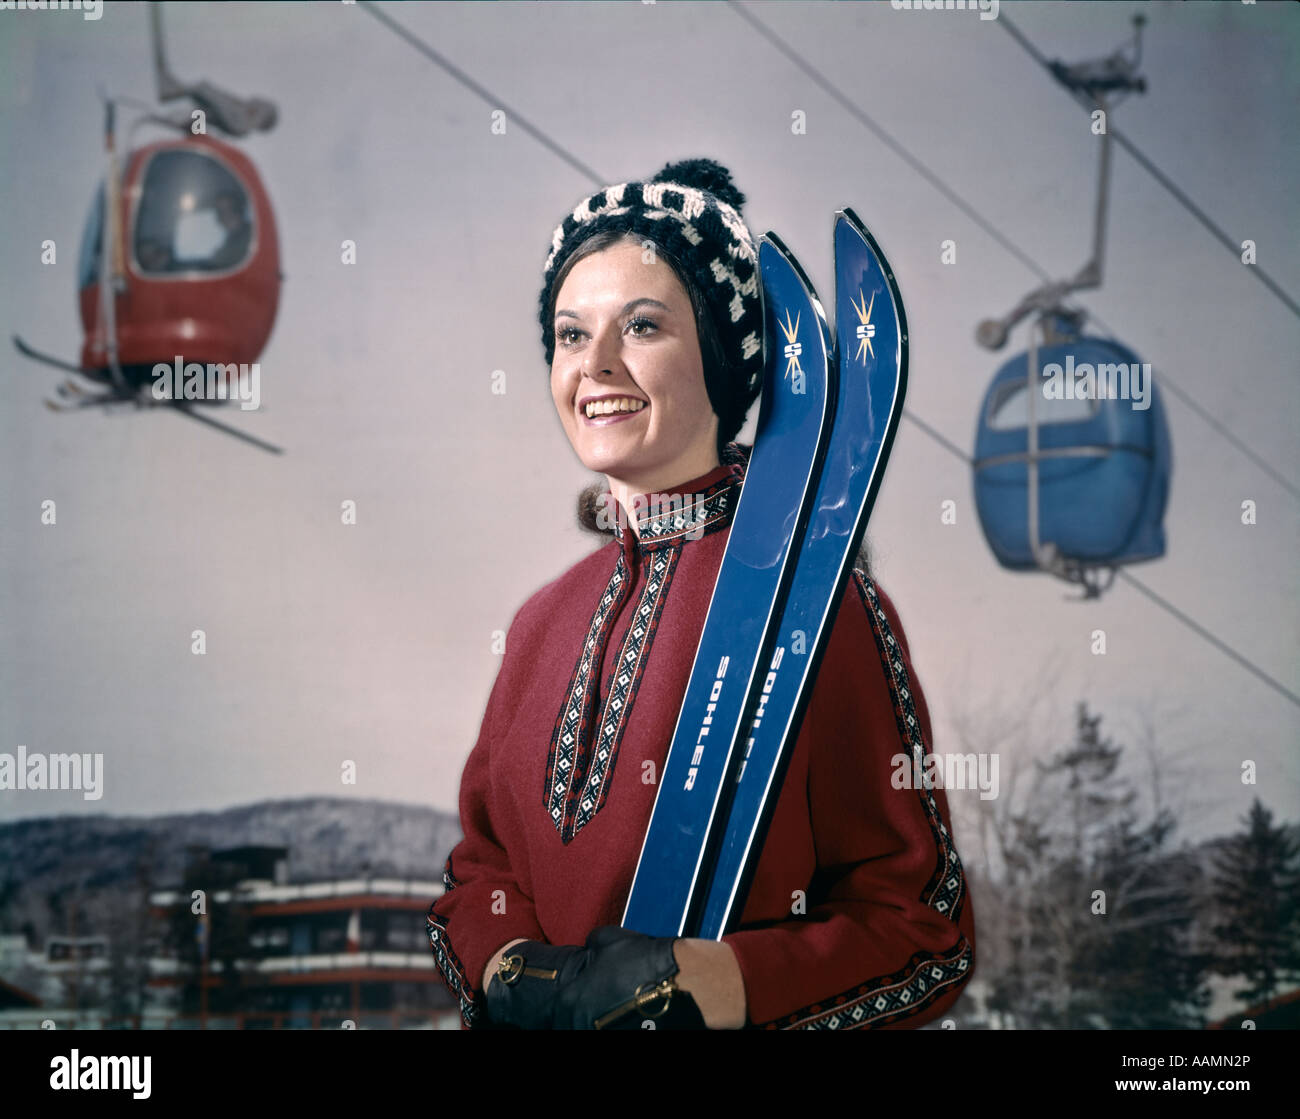 1970 1970s RETRO WOMAN IN WINTER GEAR HAT HOLDING SKIS SKI LIFT IN BACKGROUND Stock Photo